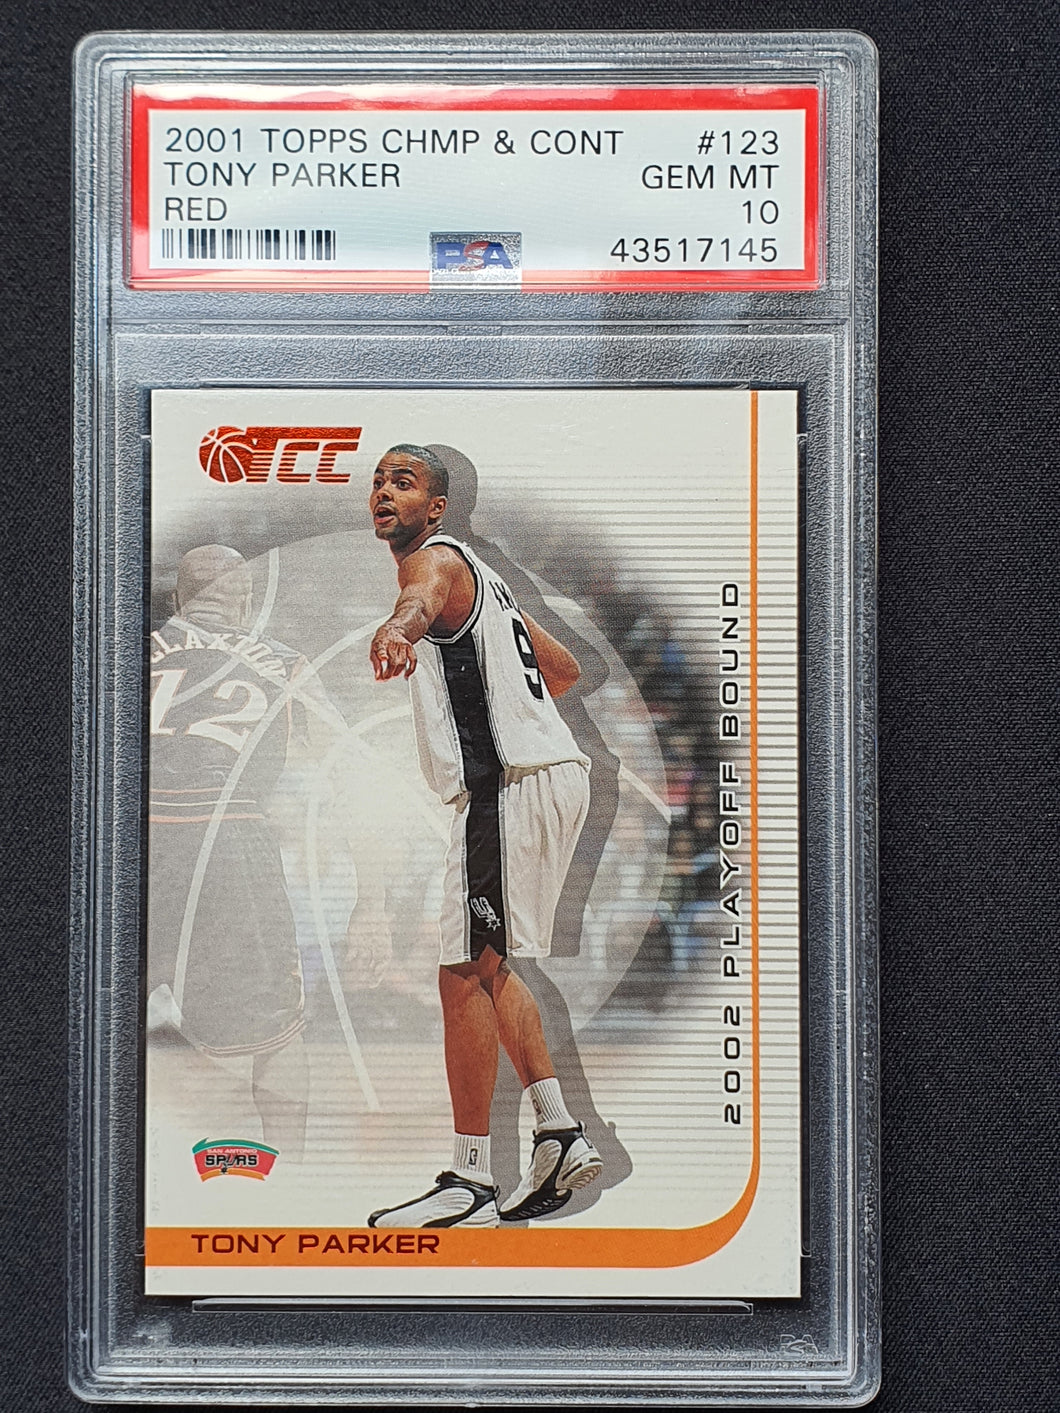 2001 Topps cham & cont Tony Parker Rookie RC #123 RED Variation POP 2